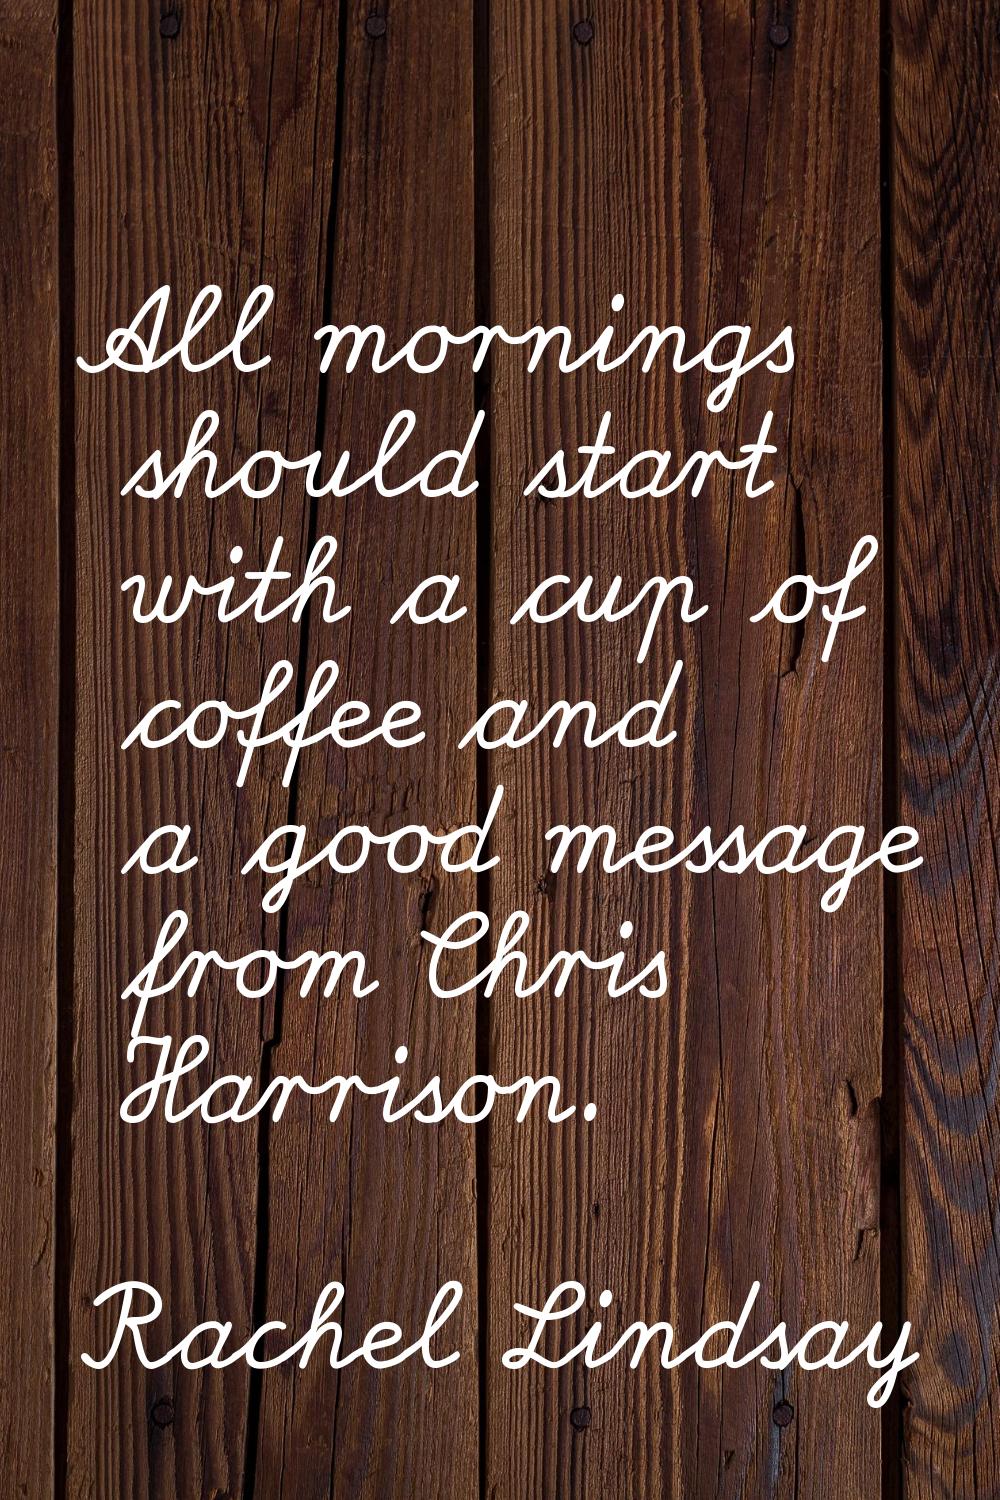 All mornings should start with a cup of coffee and a good message from Chris Harrison.